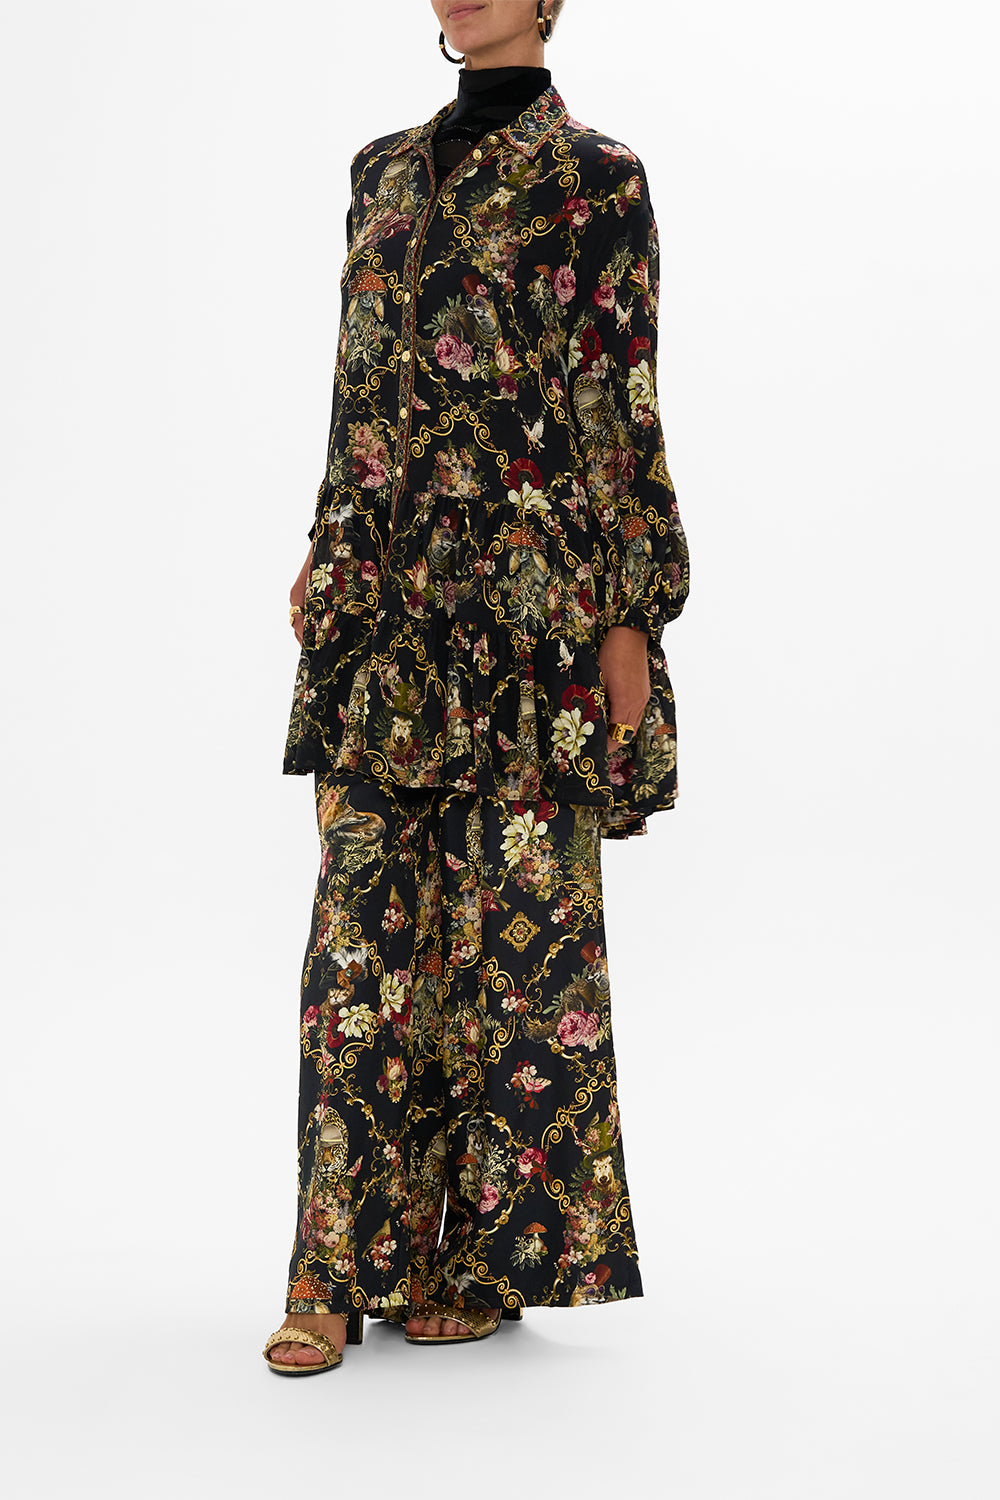 CAMILLA Black Tiered Shirt Dress in Told in the Tapestry